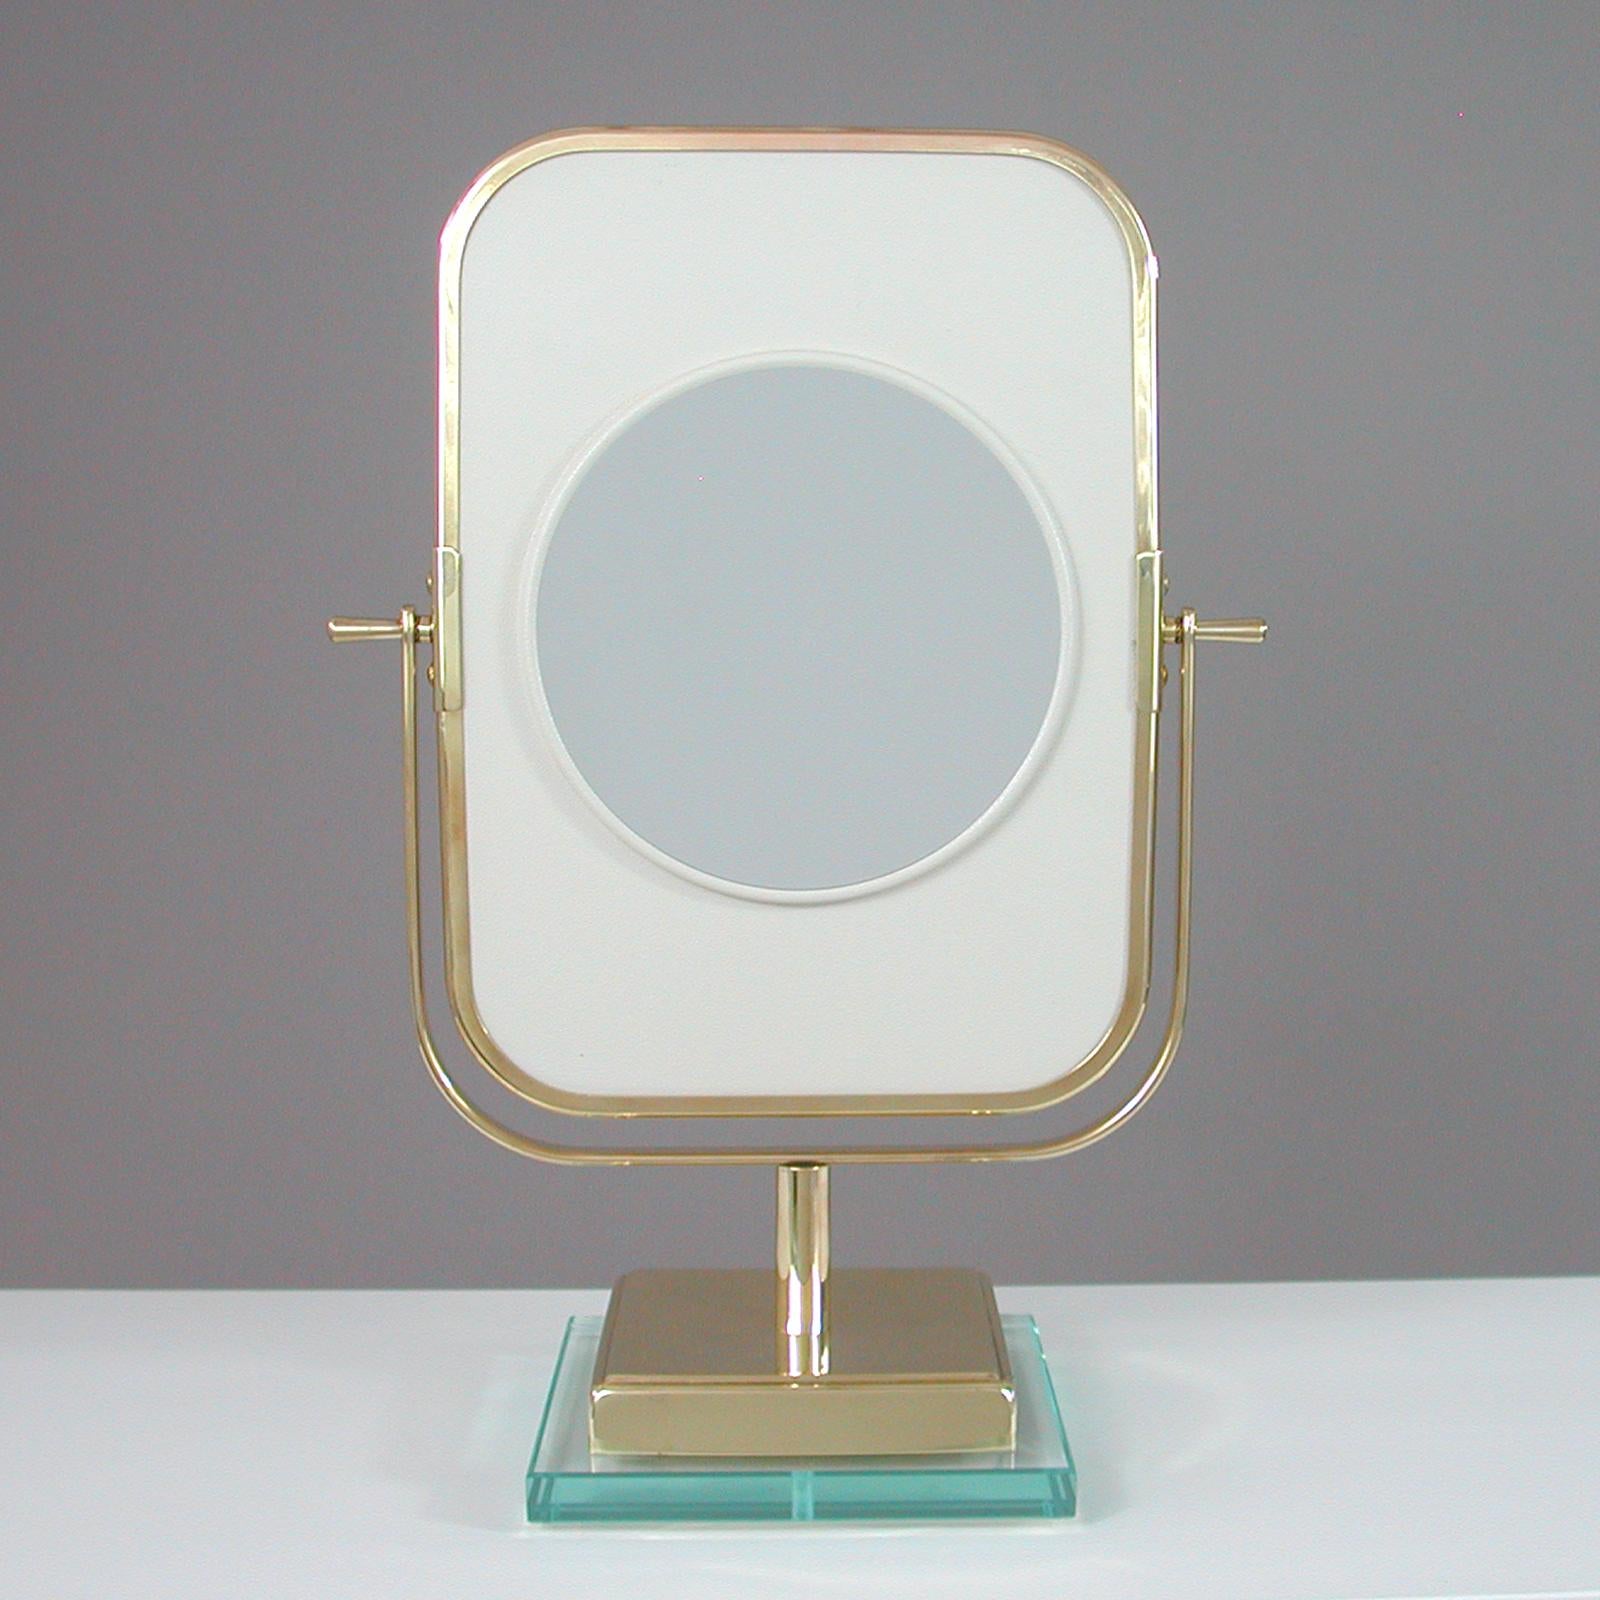 Italian Brass and Glass Double Sided Table Mirror 1950s, Fontana Arte Style 6